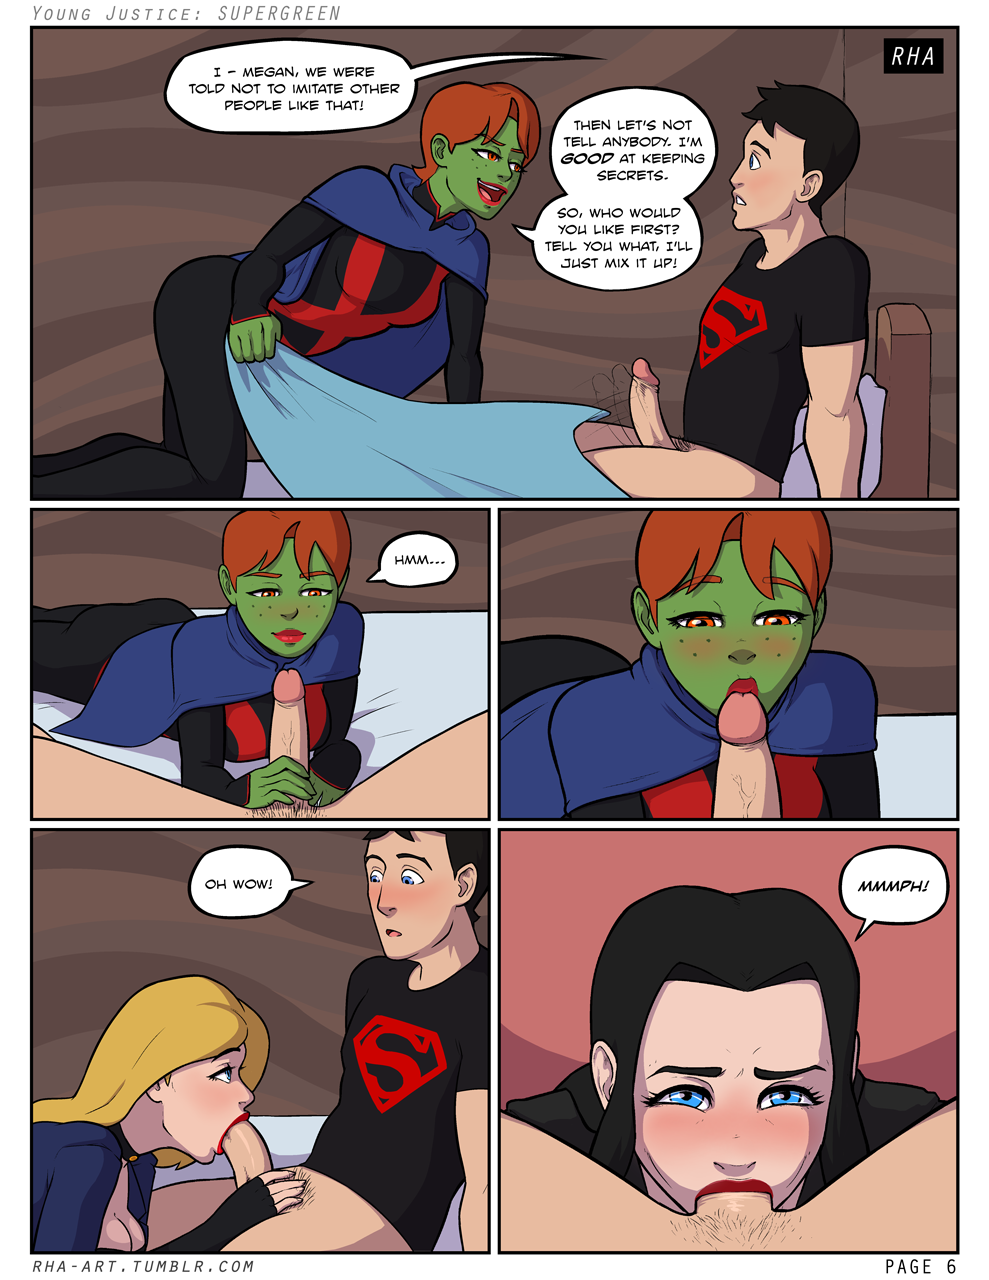 rha-art:  Young Justice: Supergreen — PAGES 00–07 &gt; Part 1: Pages 00 –